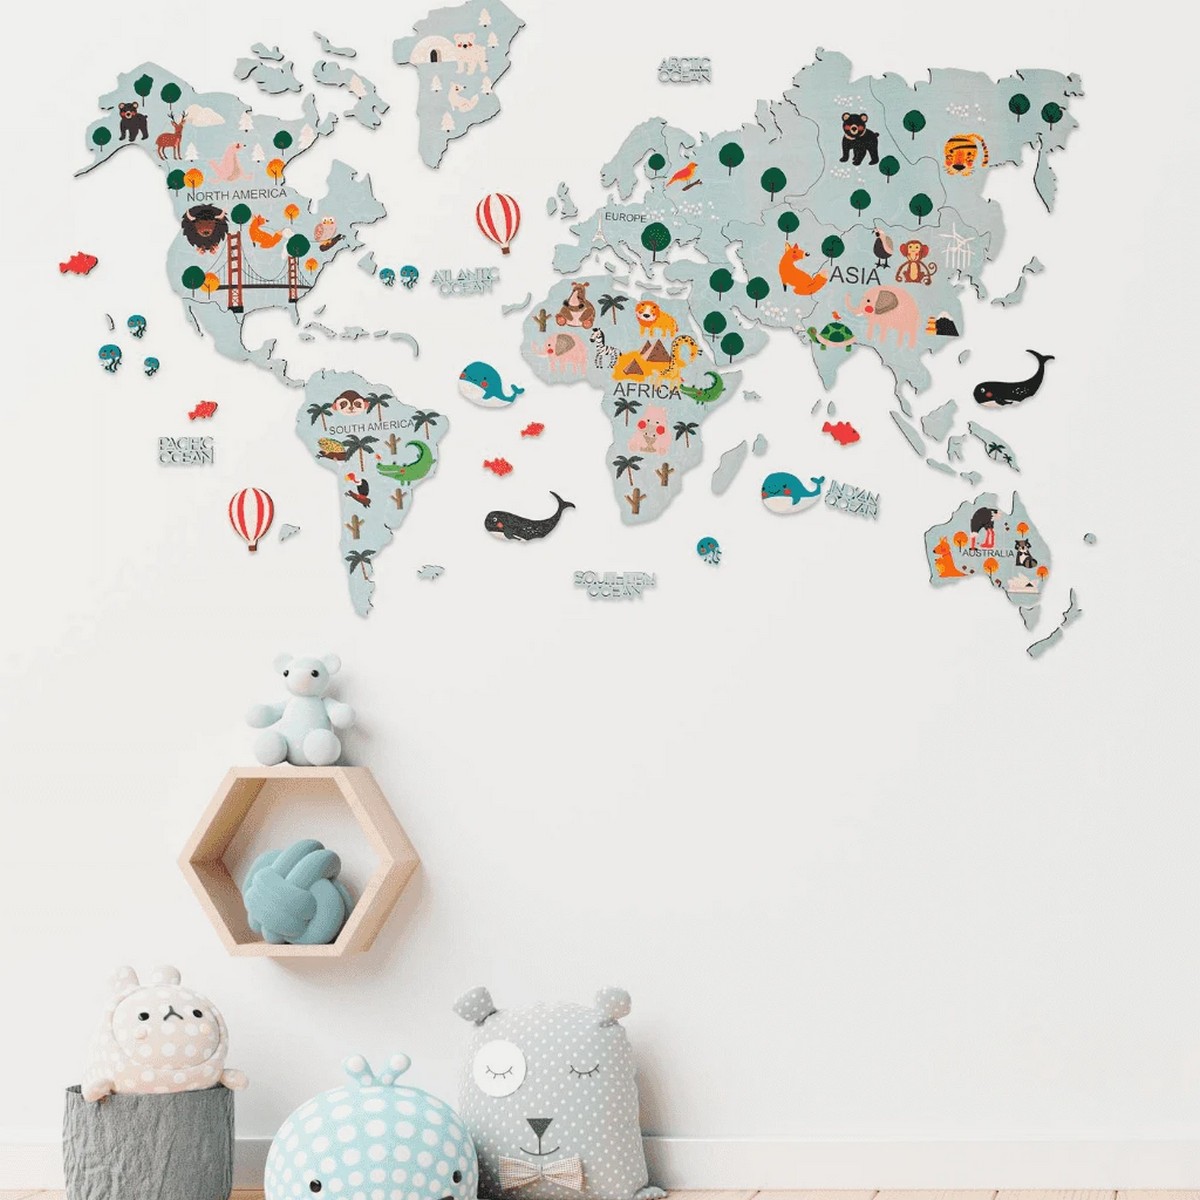 wooden map on the wall 2D continents